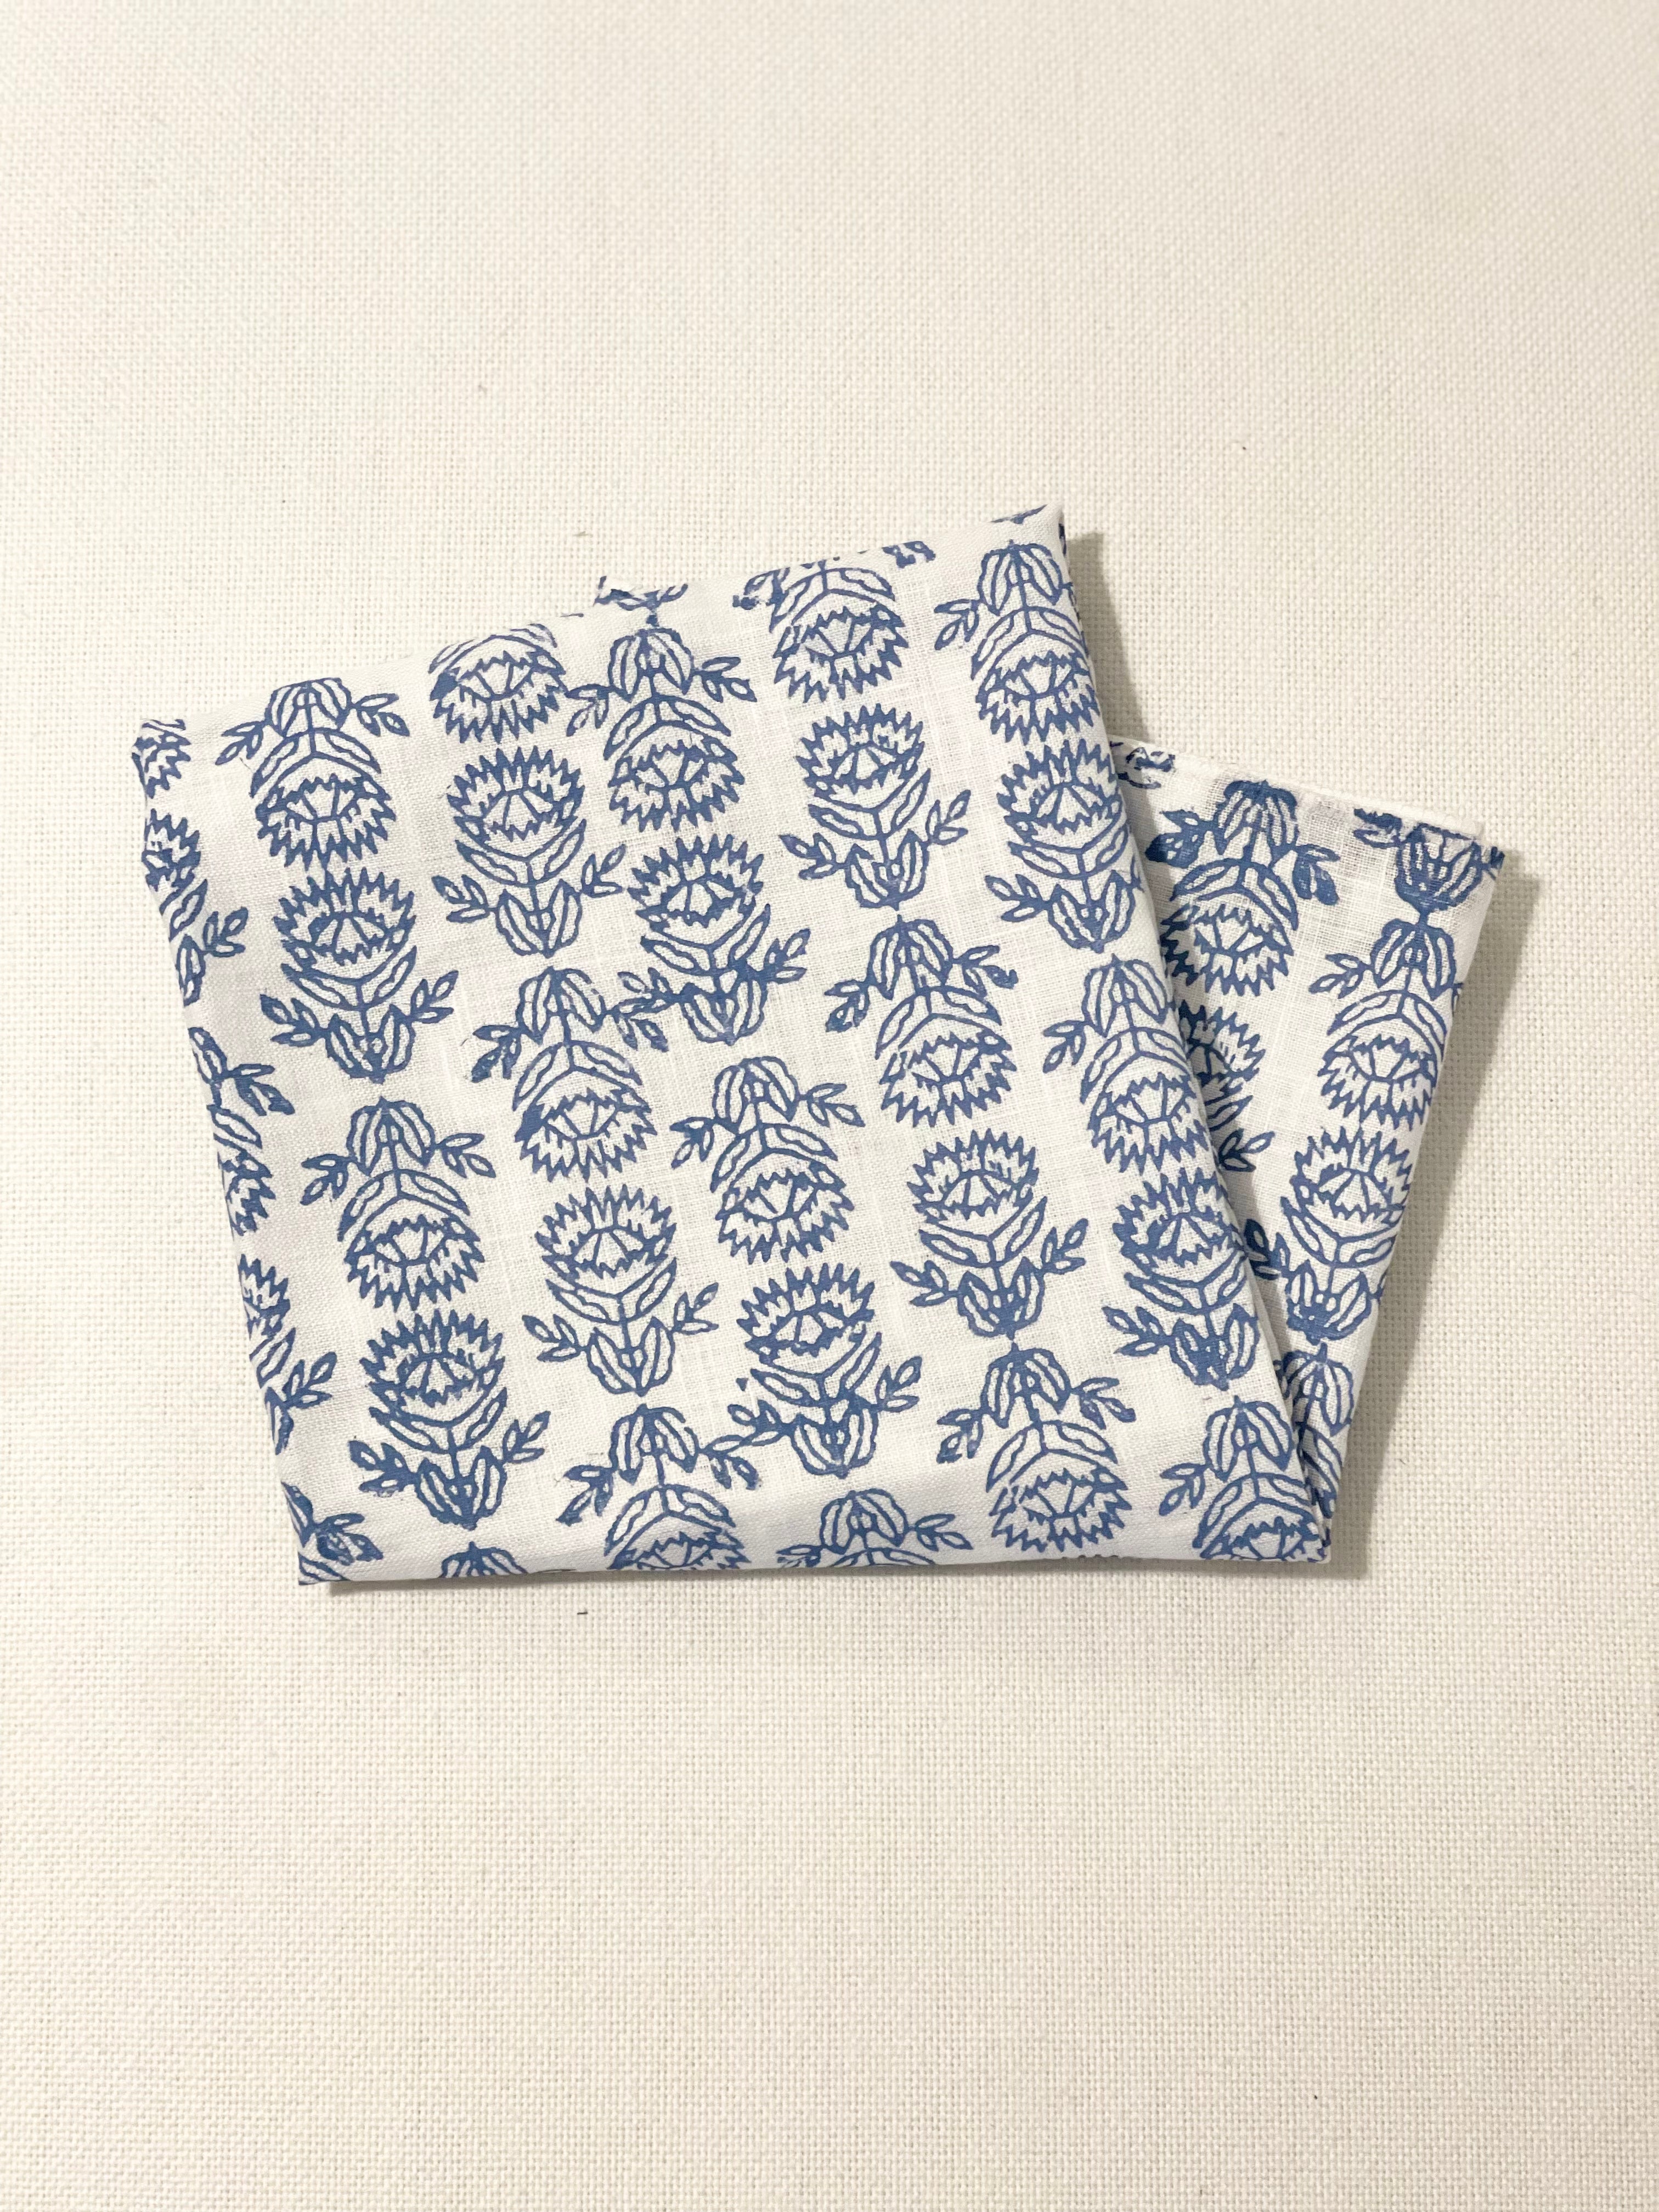 Bandana - White Linen with Protea, Uniform Blue by Mended